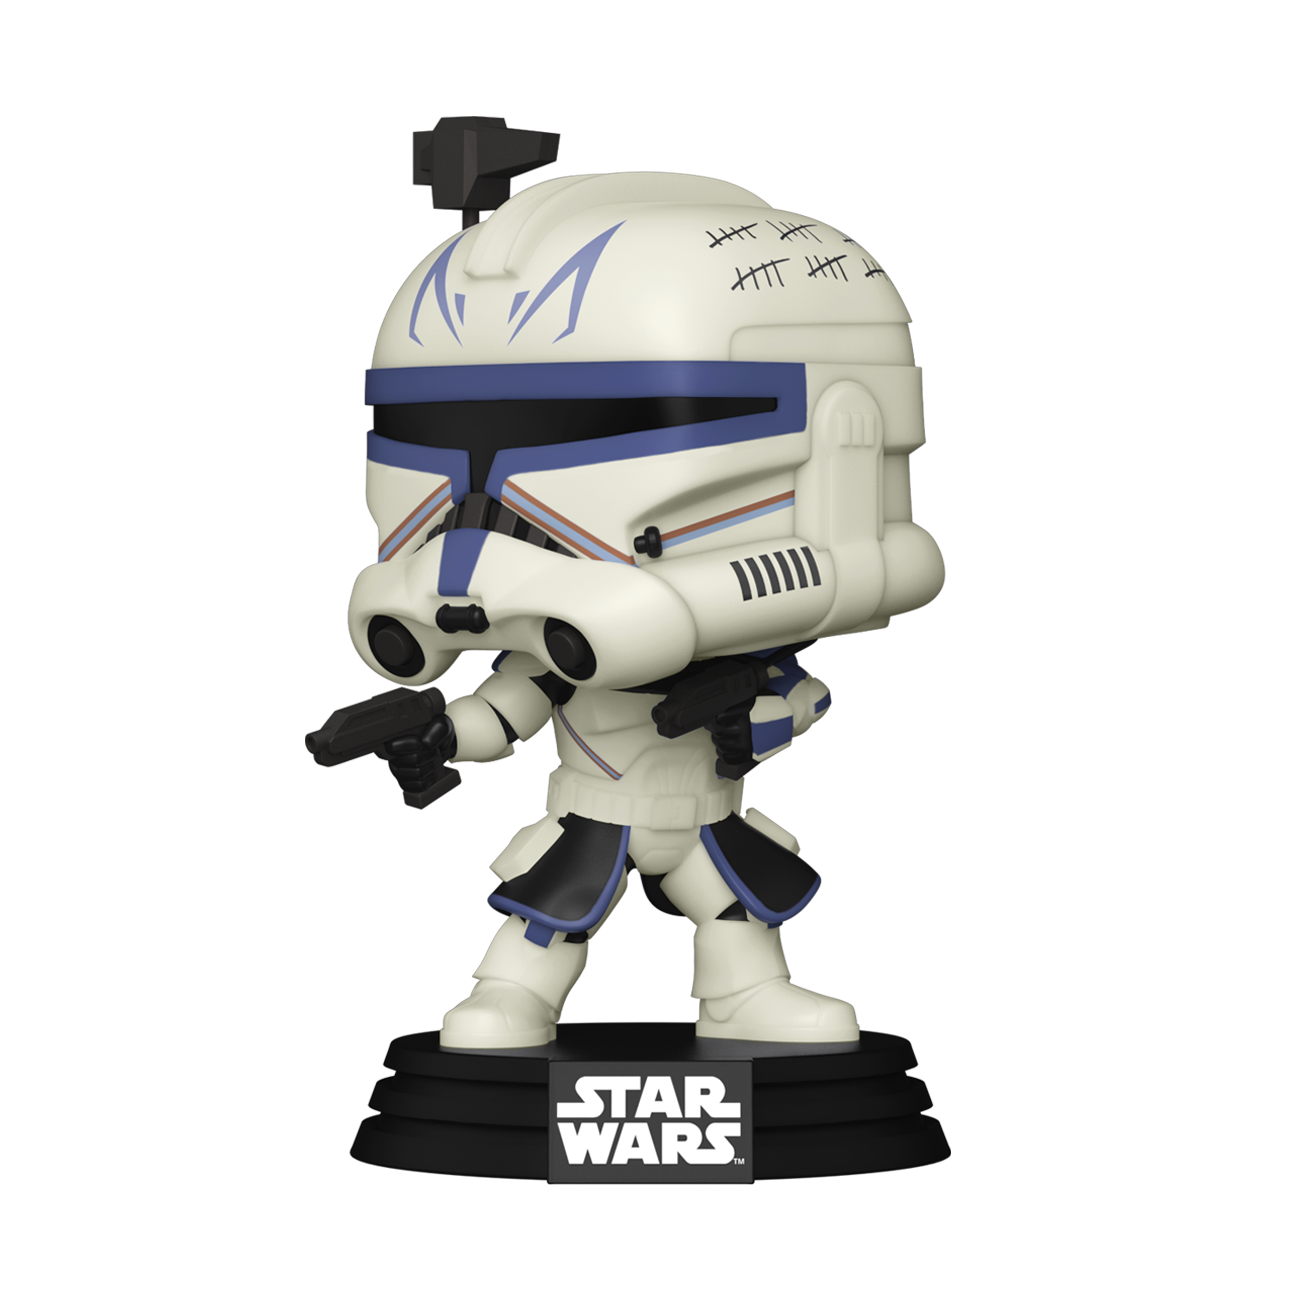 Buy Pop! Clone Trooper (Phase 1) at Funko.